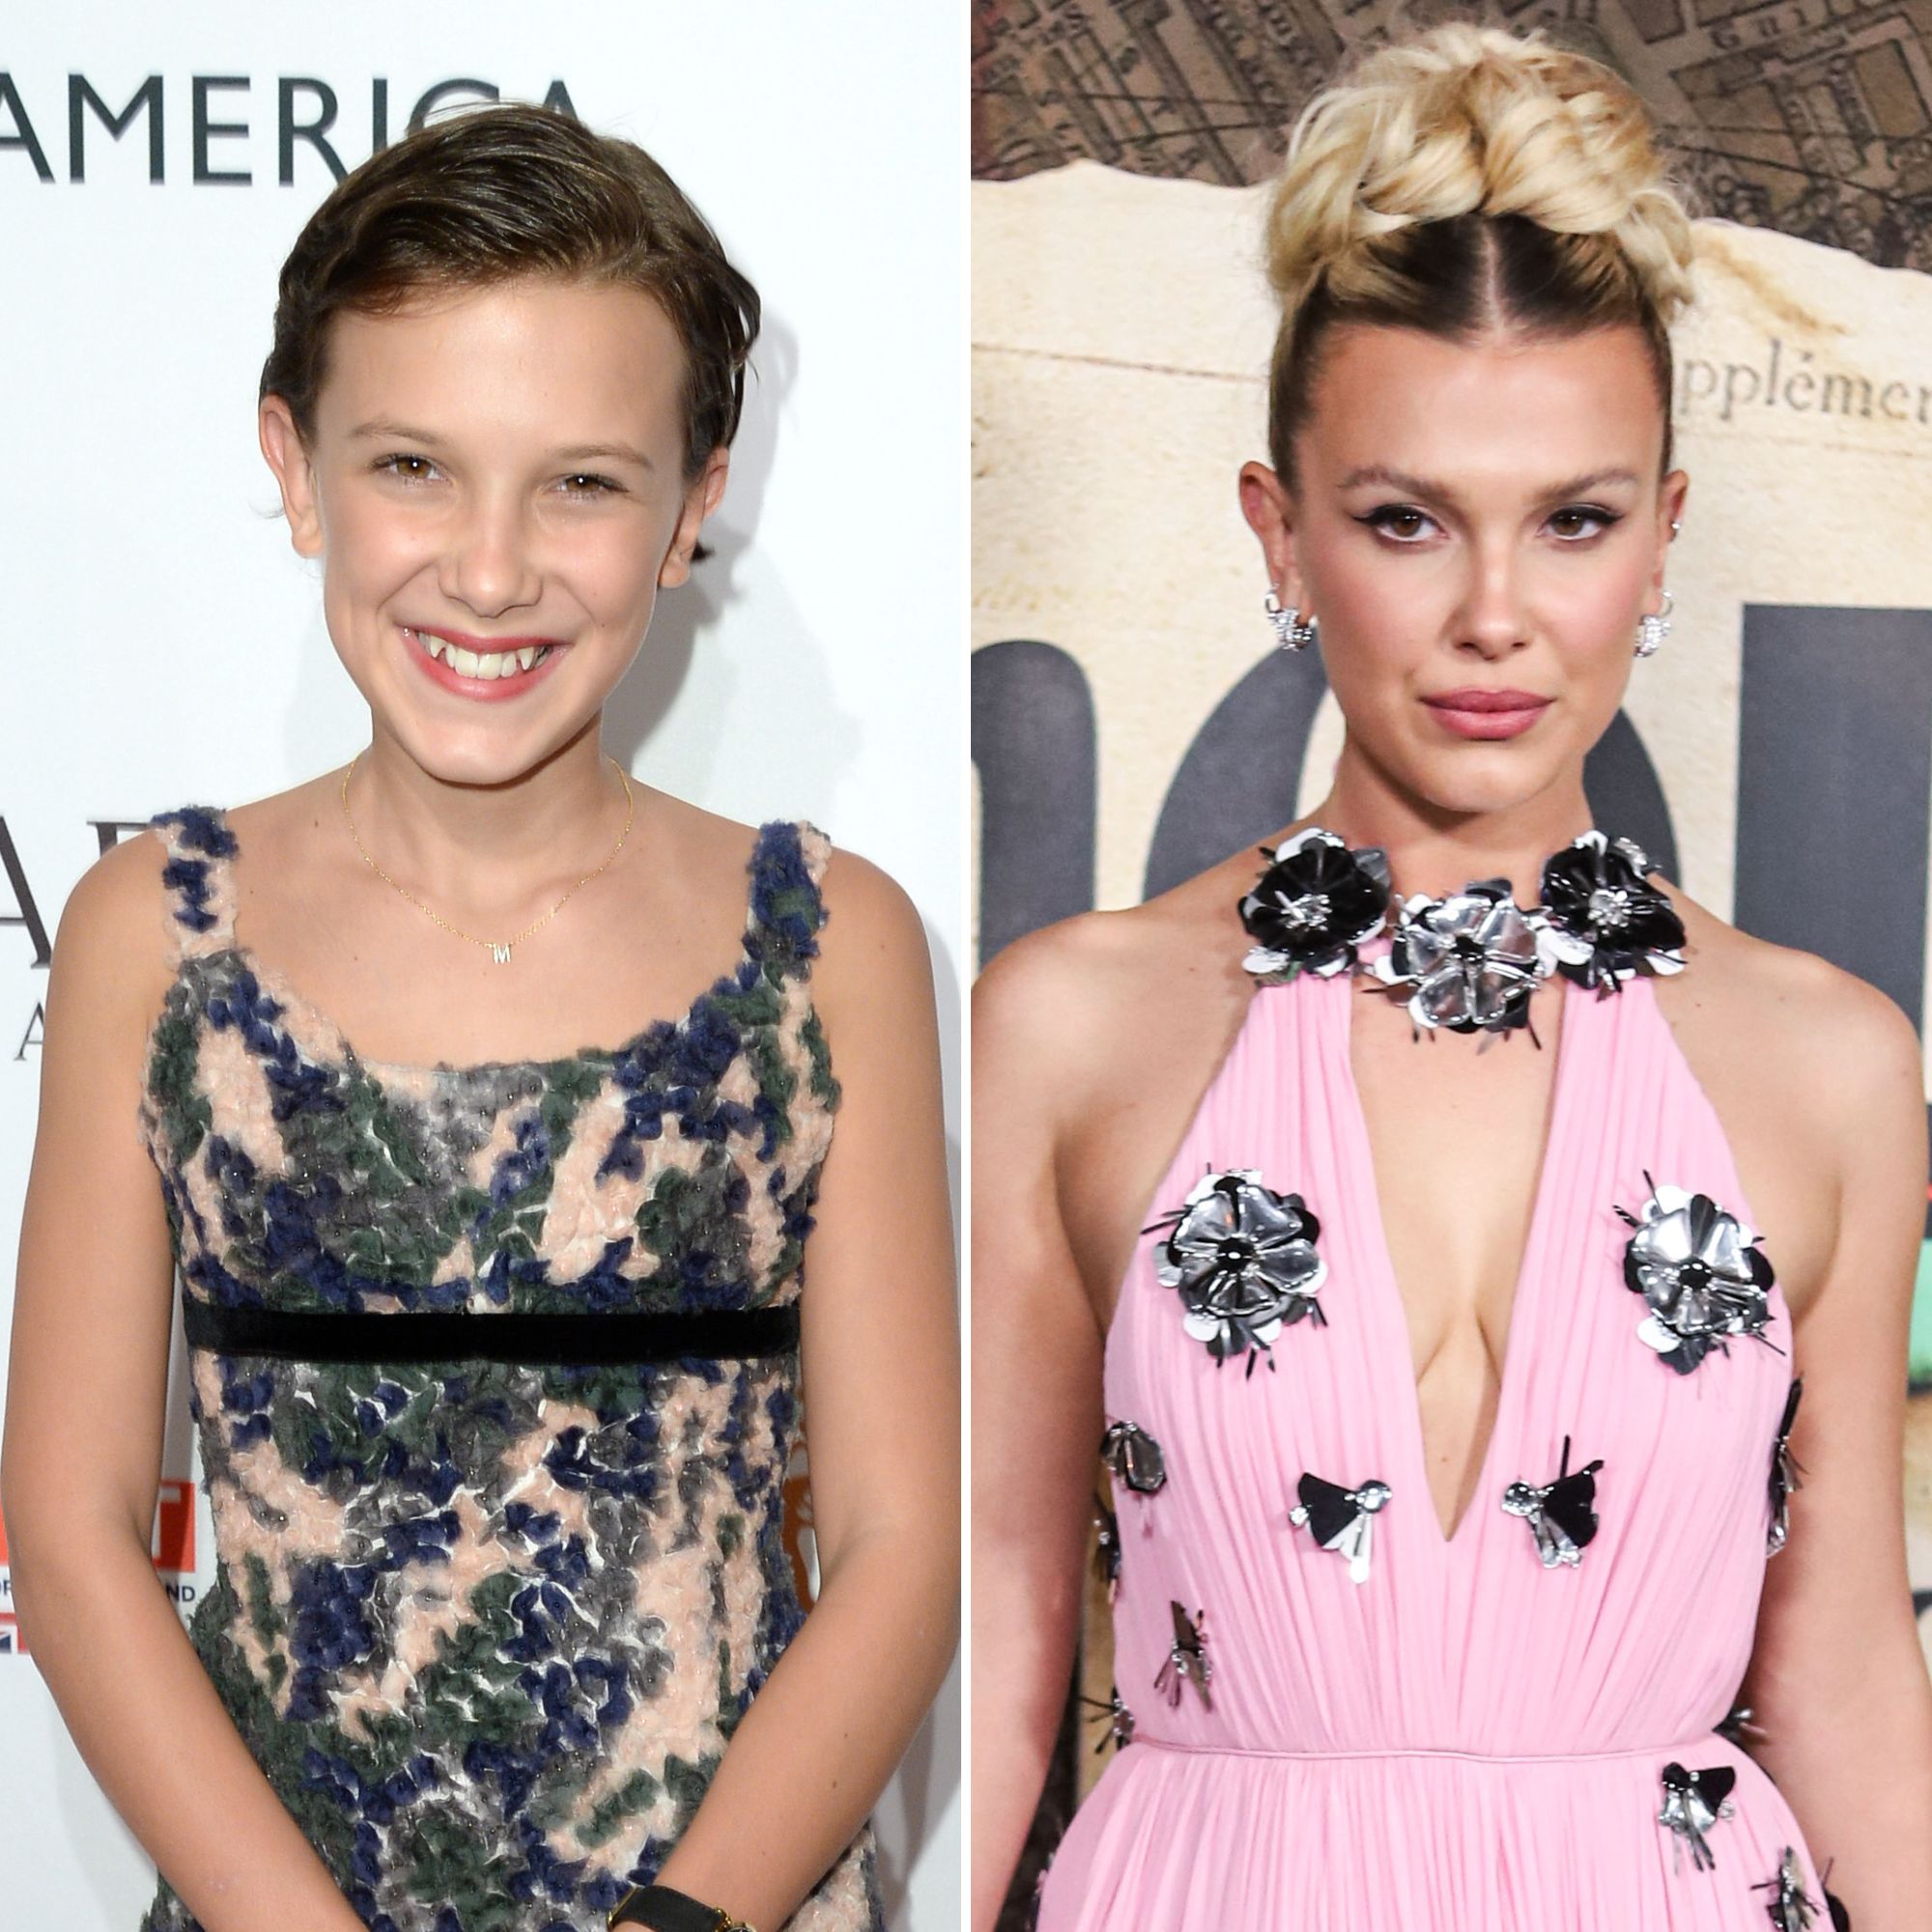 Millie Bobby Brown Plastic Surgery: The Secret Transformation Revealed